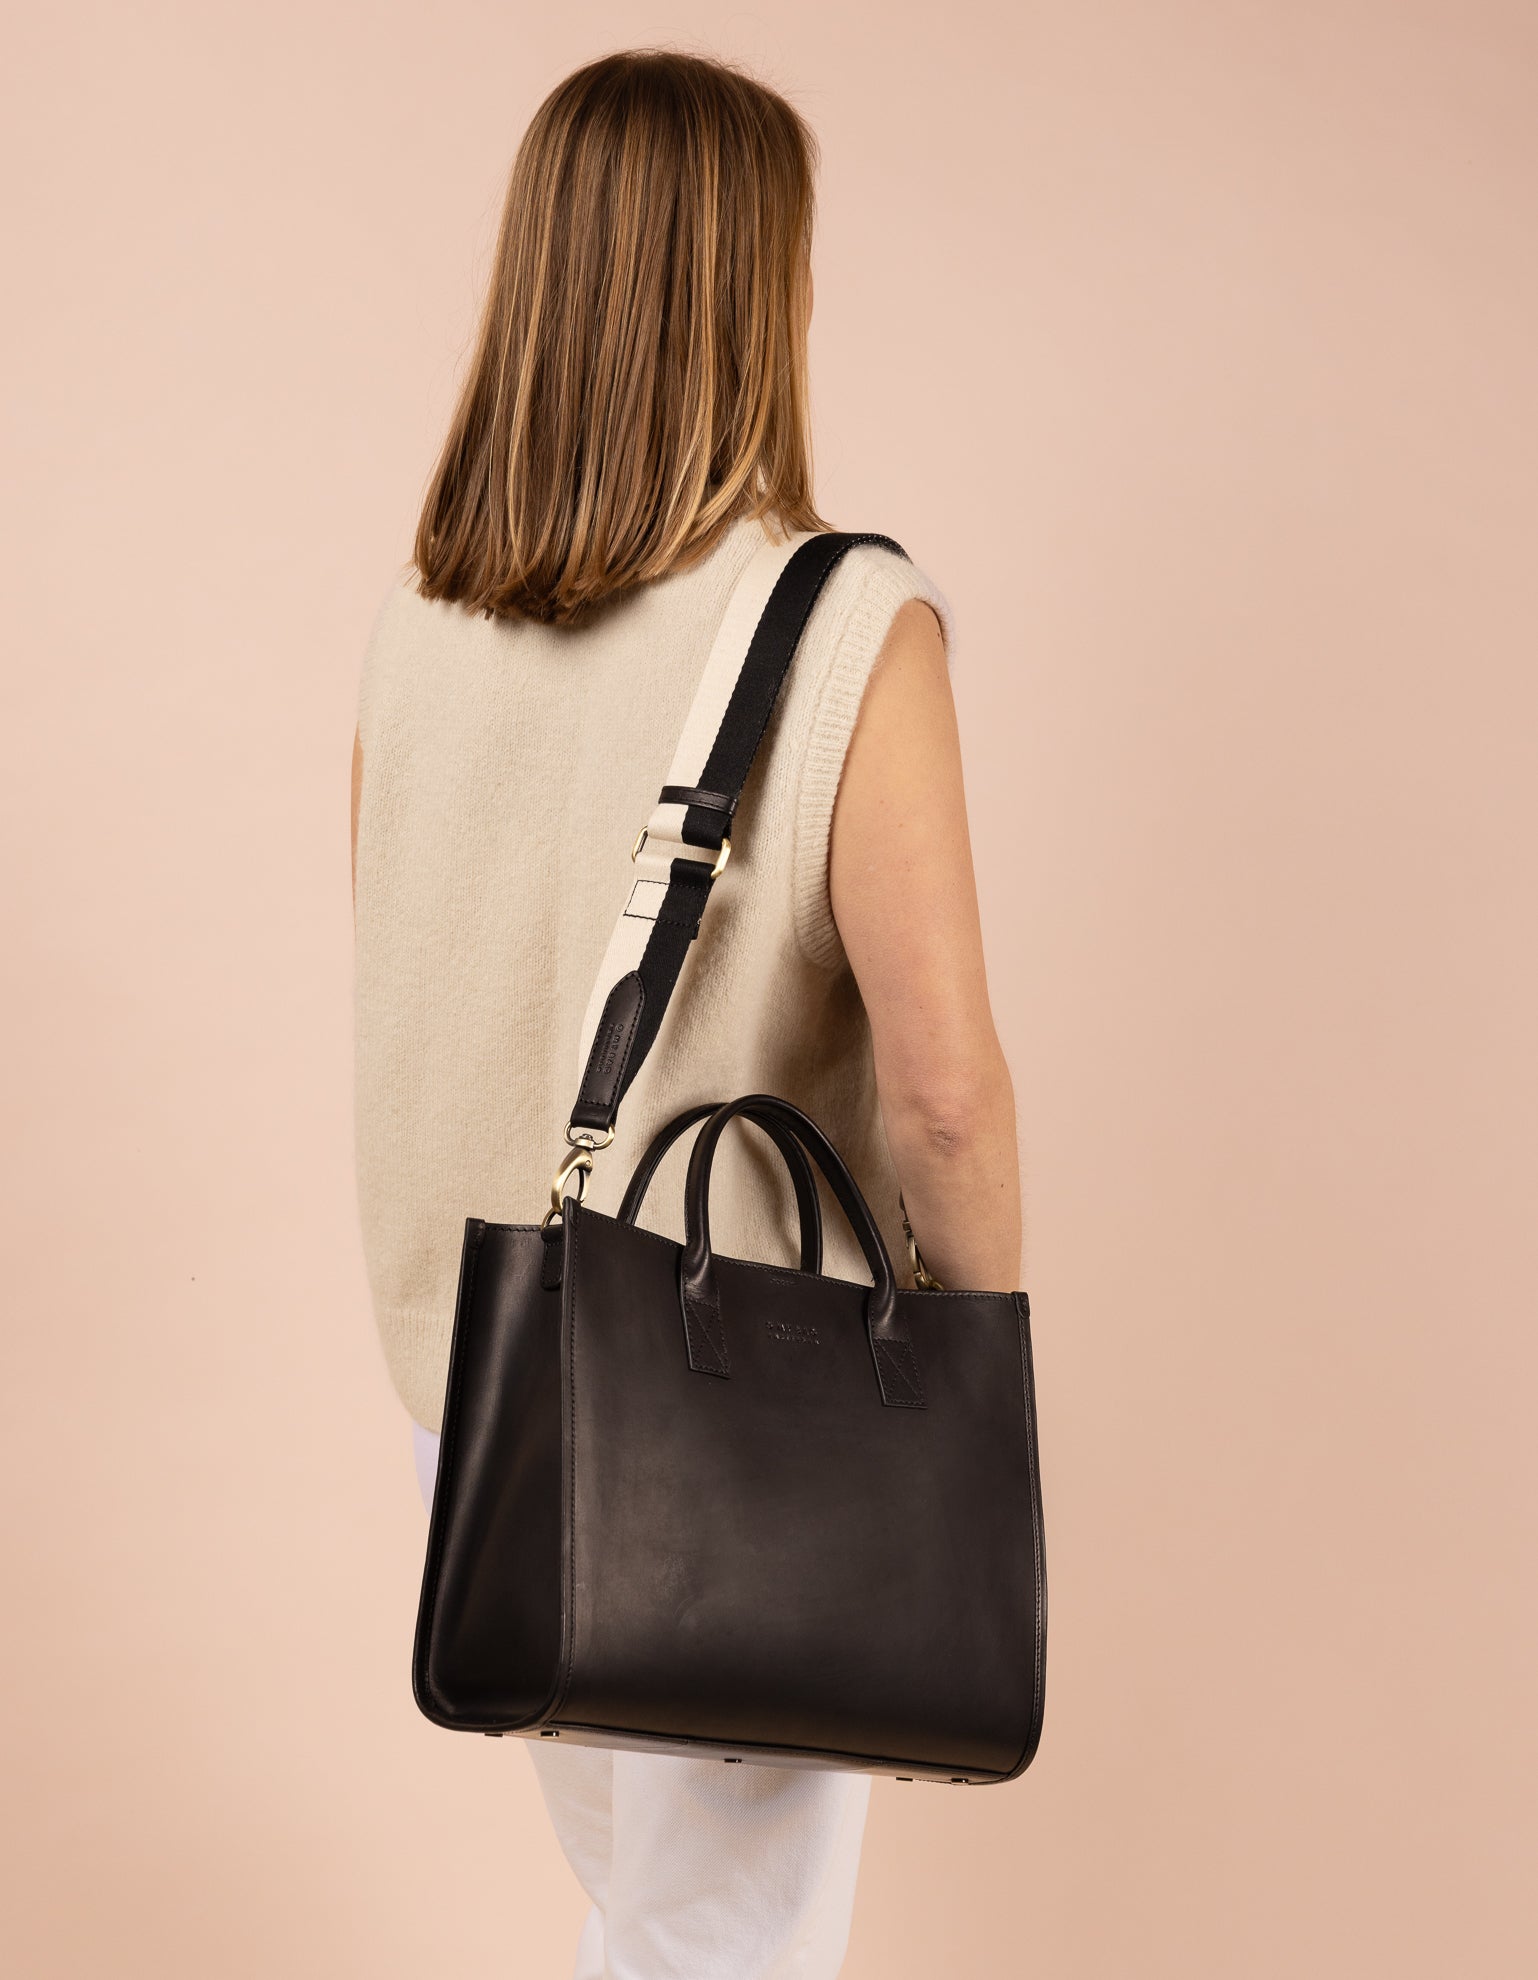 Rectangle shaped black leather tote bag with black and white strap - model image